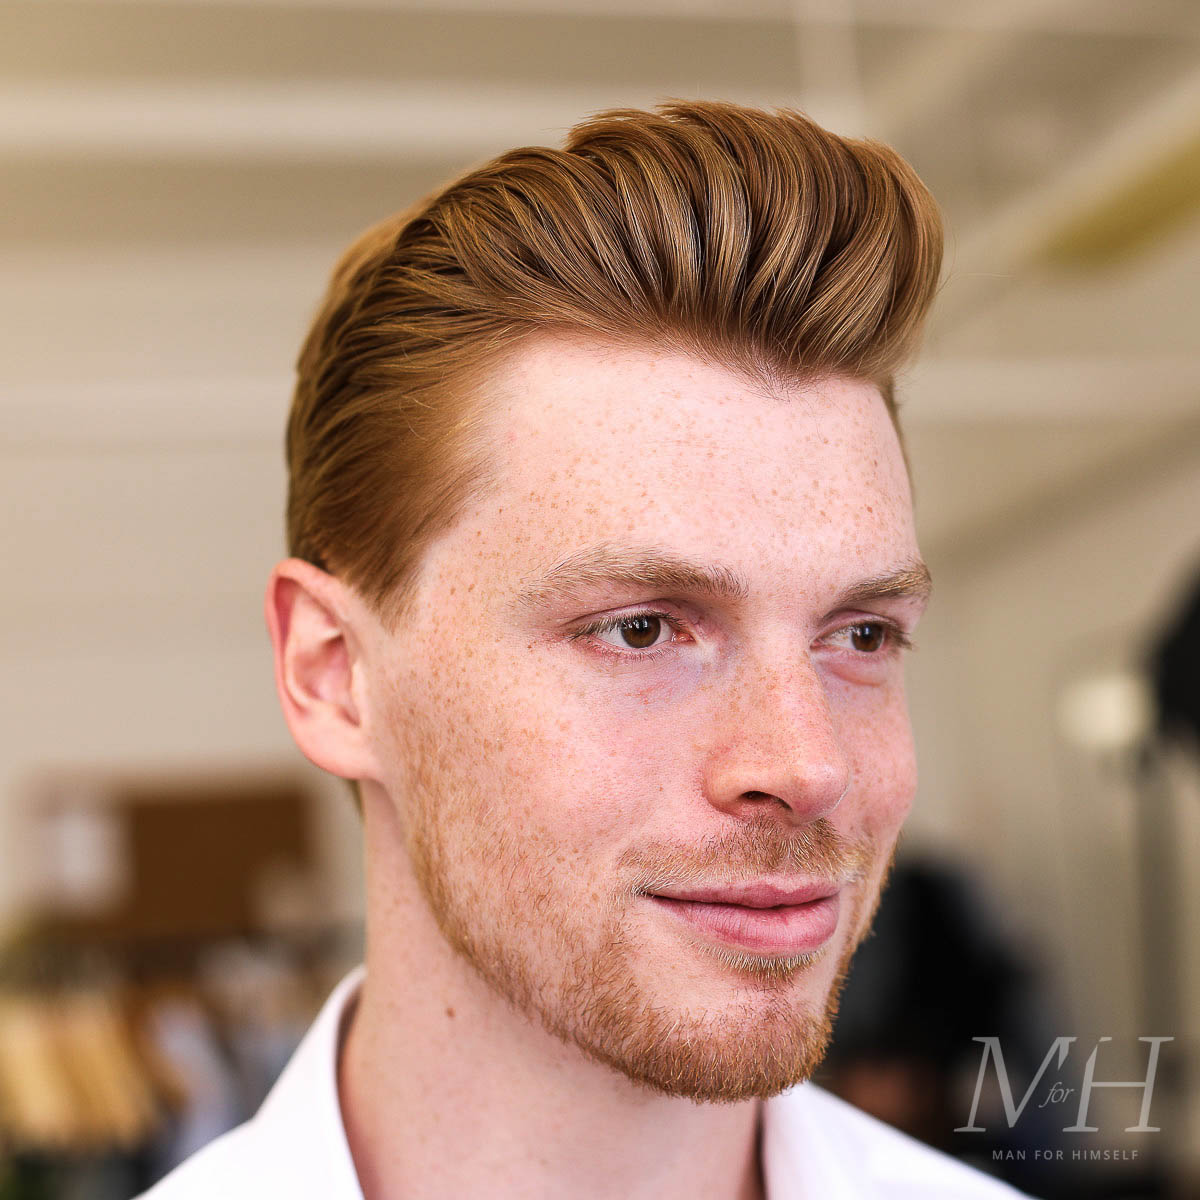 50 Classy Professional Hairstyles For Men (Business Hairstyles) - Hairmanz  | Corte de cabelo masculino, Cabelo masculino, Rosto